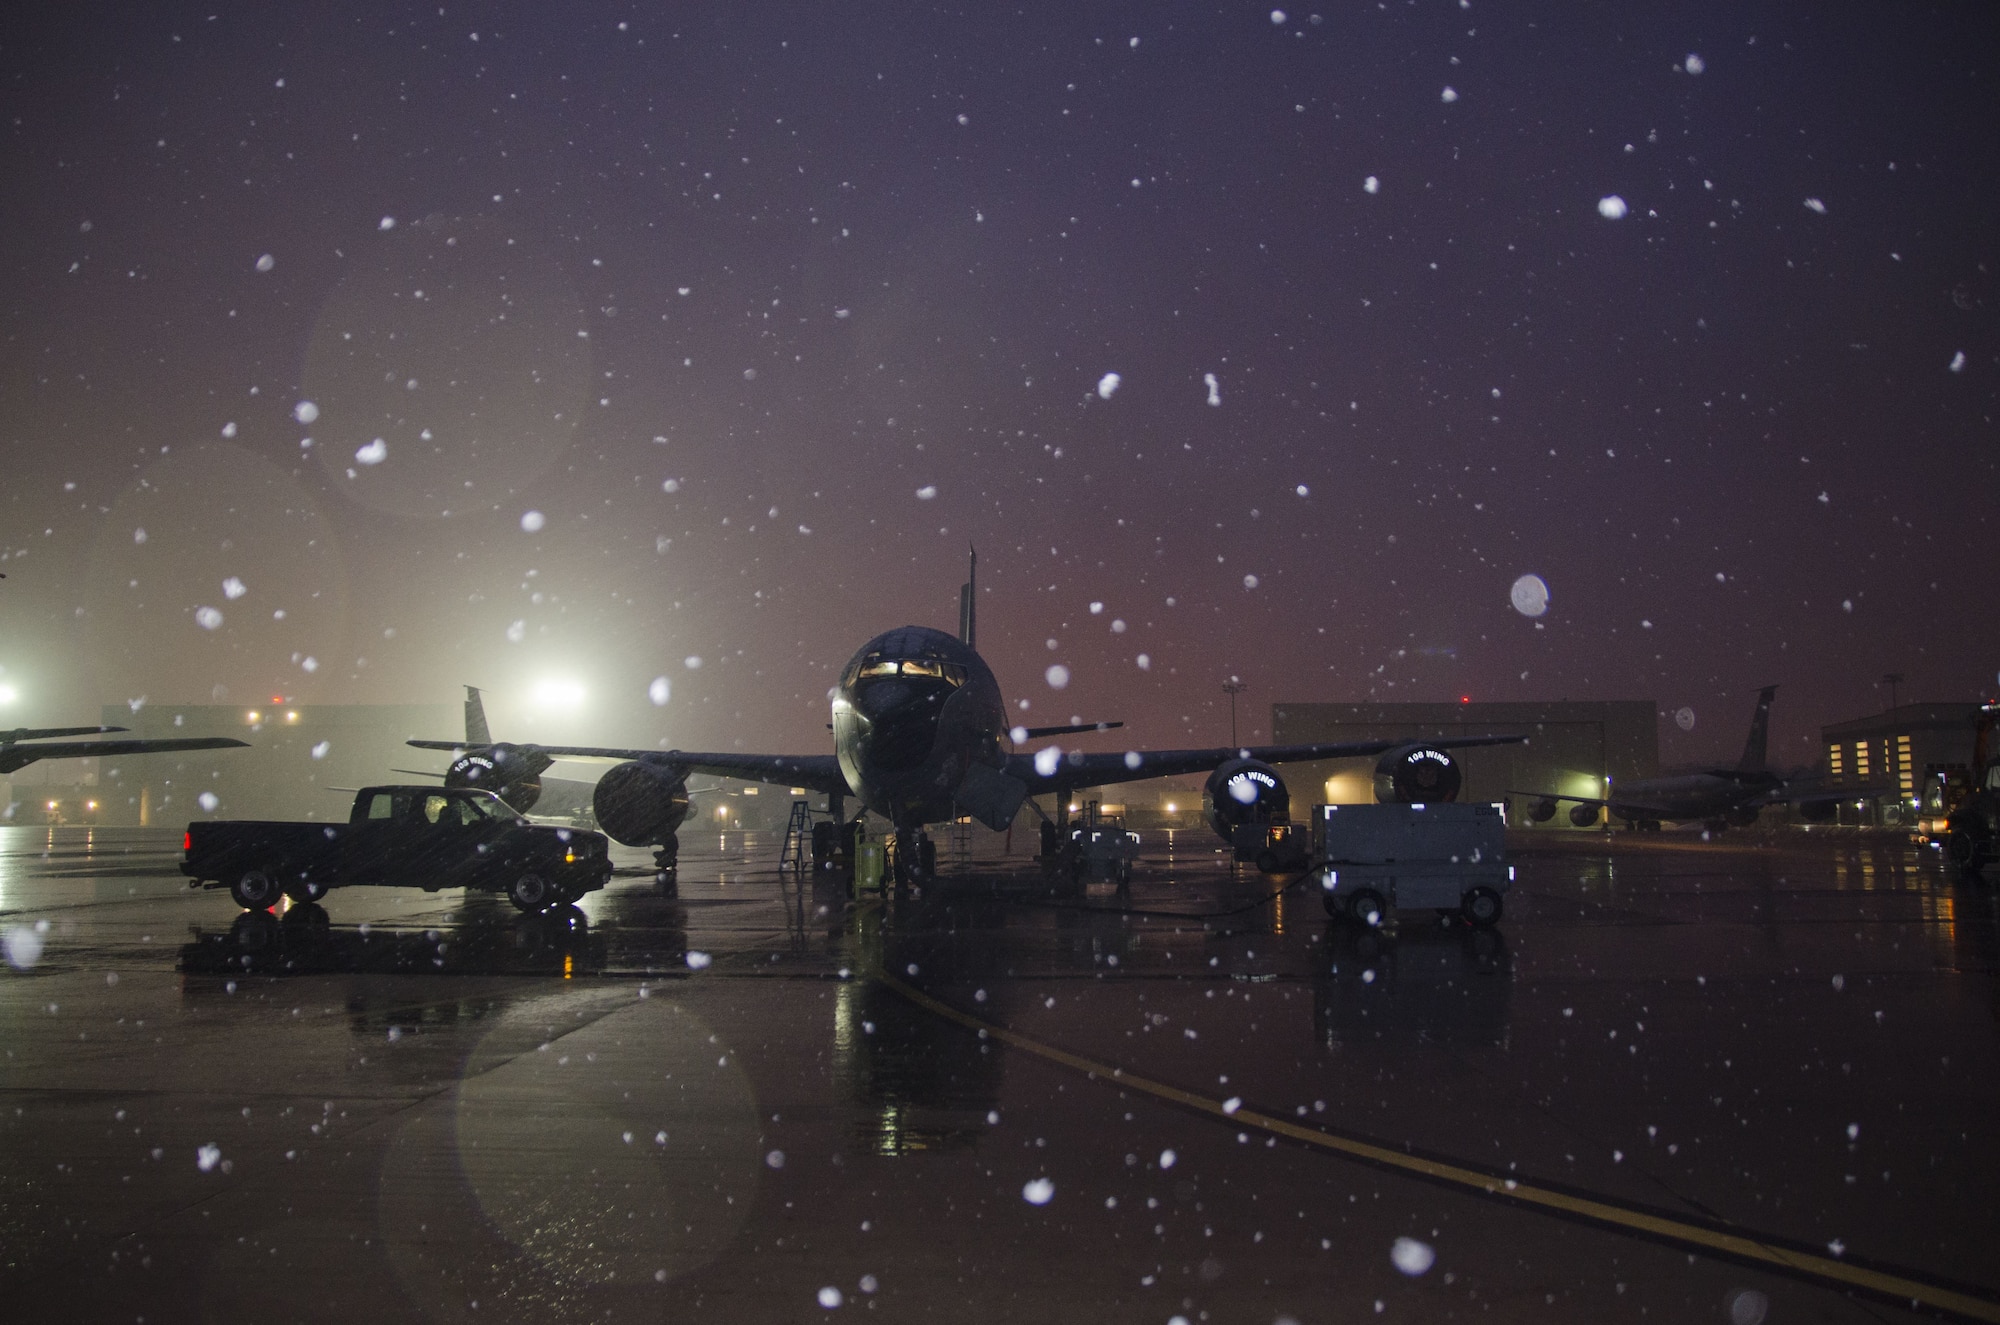 Snow falls as a 141st Air Refueling Squadron KC135R is prepped on the flightline at Joint Base McGuire-Dix-Lakehurst, N.J., Jan. 17, 2018. (U.S. Air National Guard photo by Staff Sgt. Ross A. Whitley)